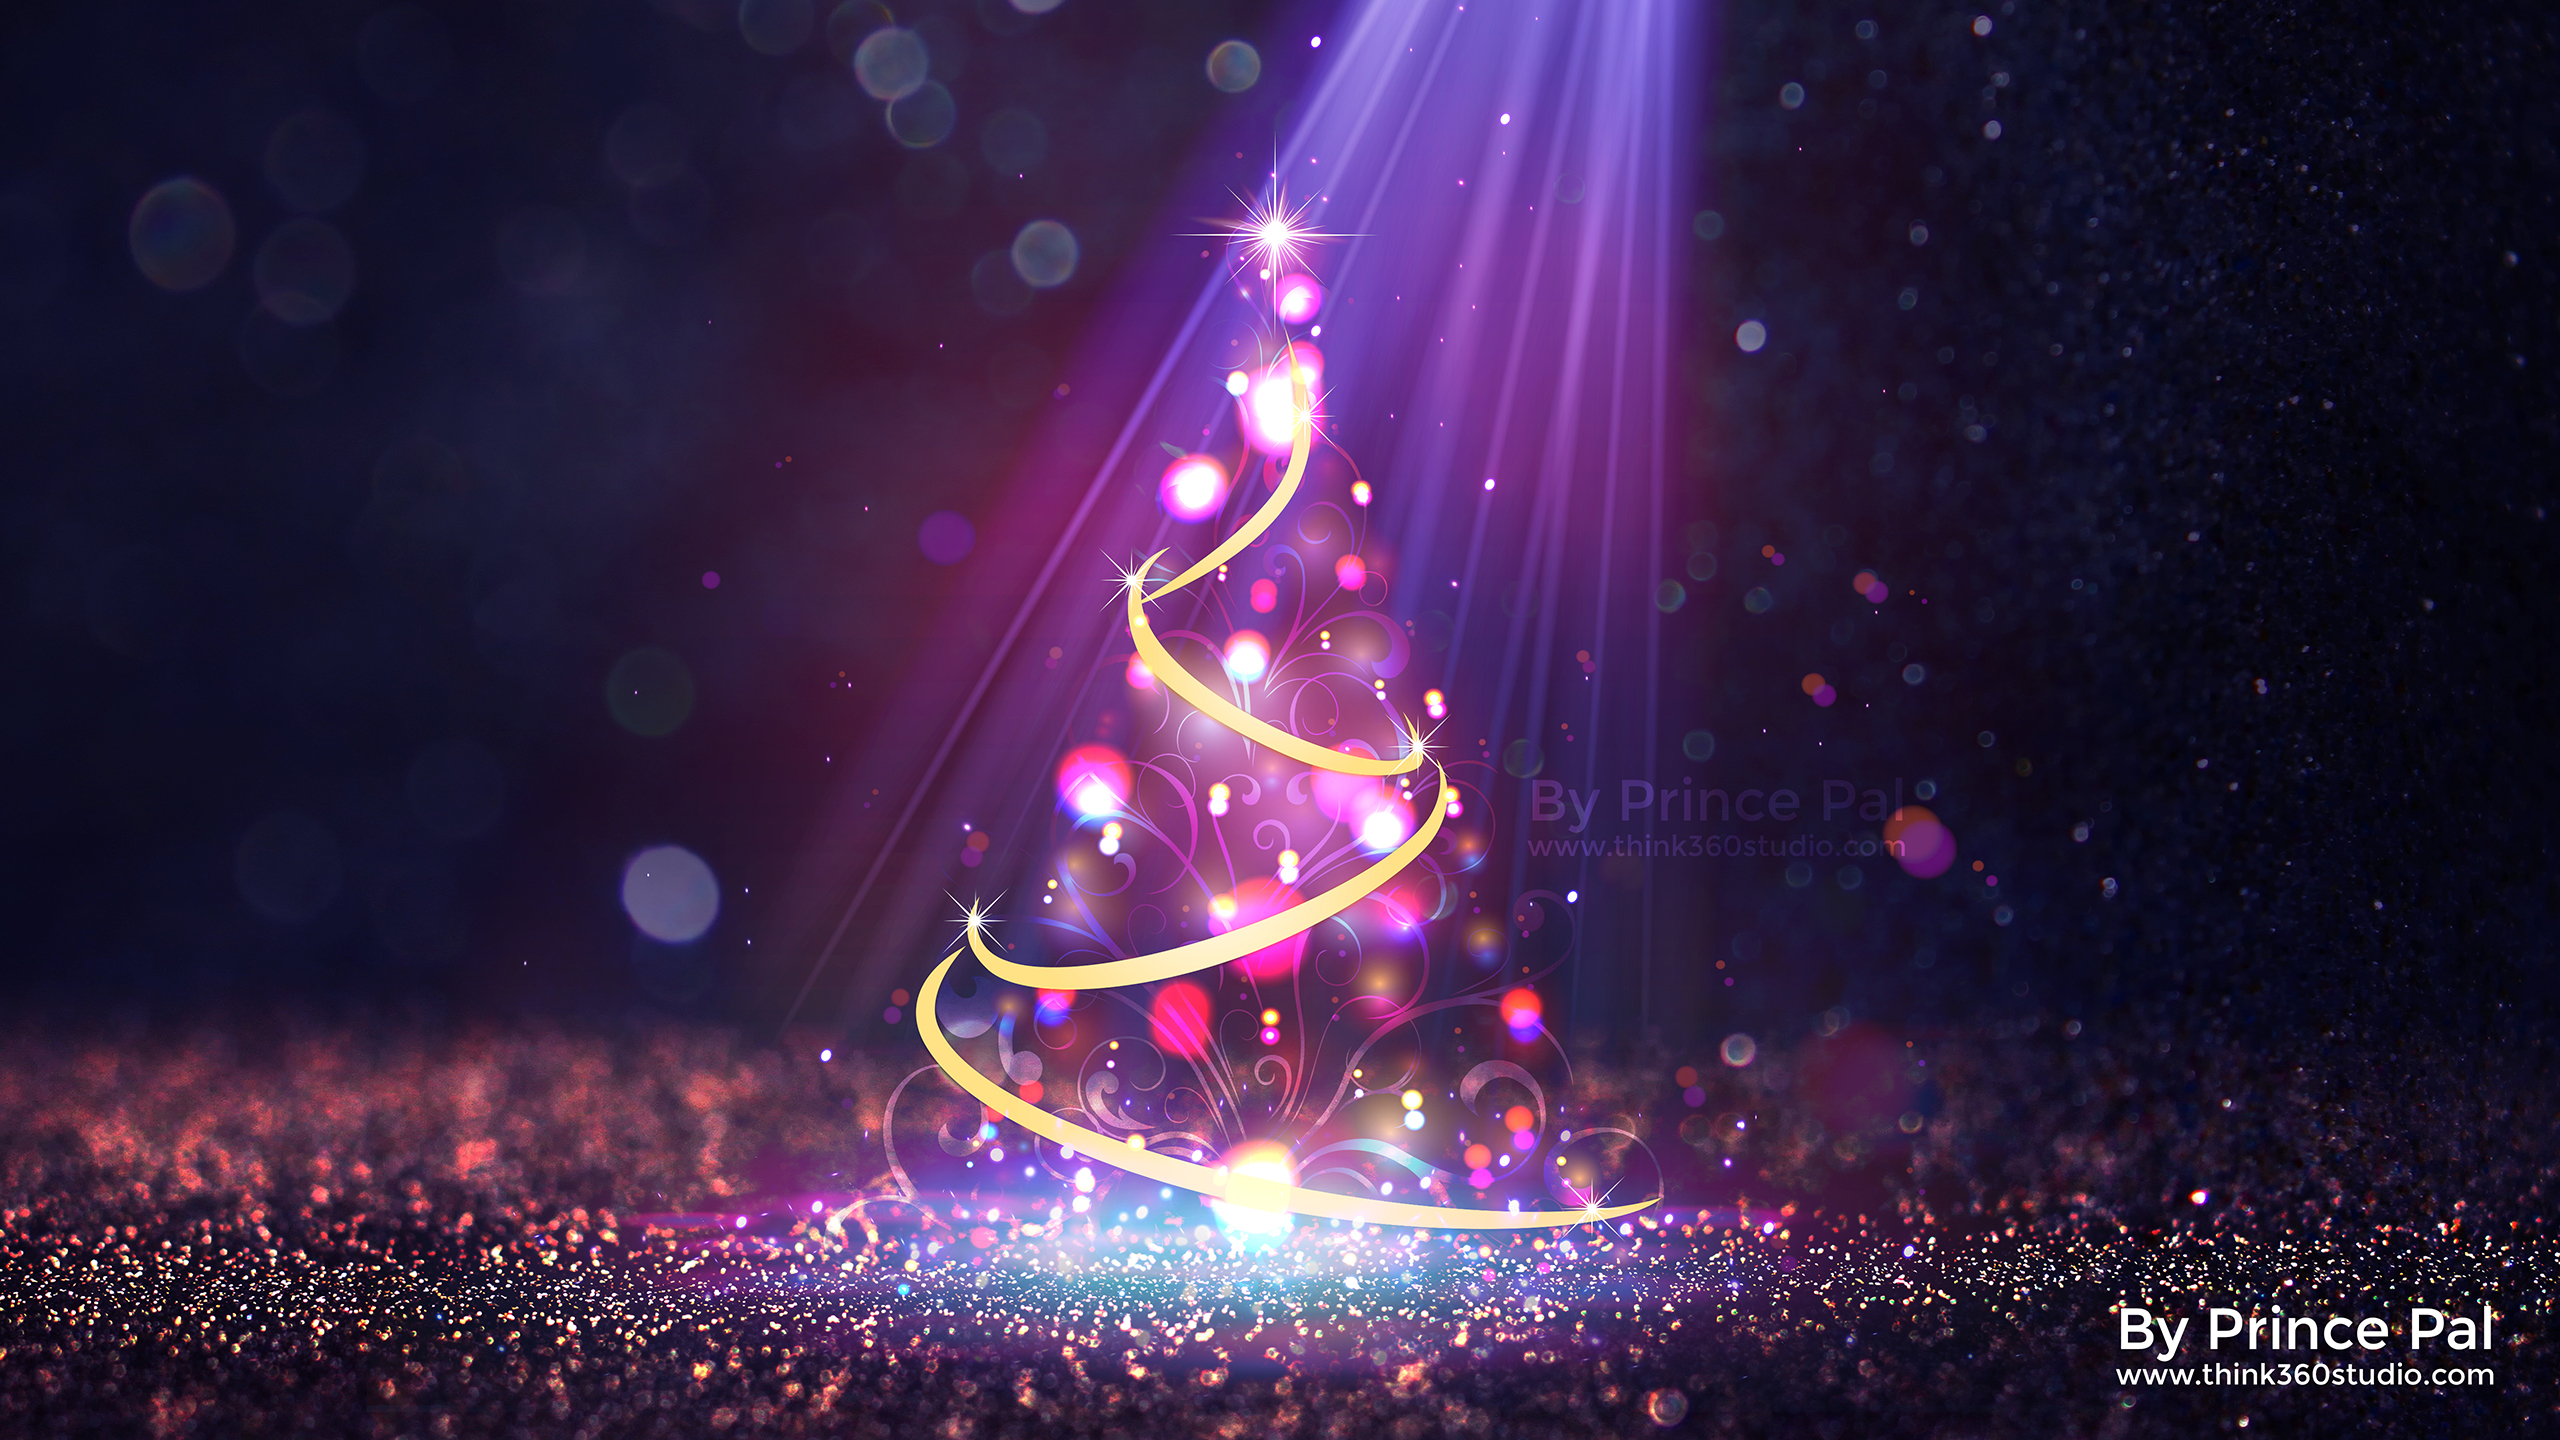 Merry Christmas Wallpapers By Prince Pal | by Think360 Studio | Medium